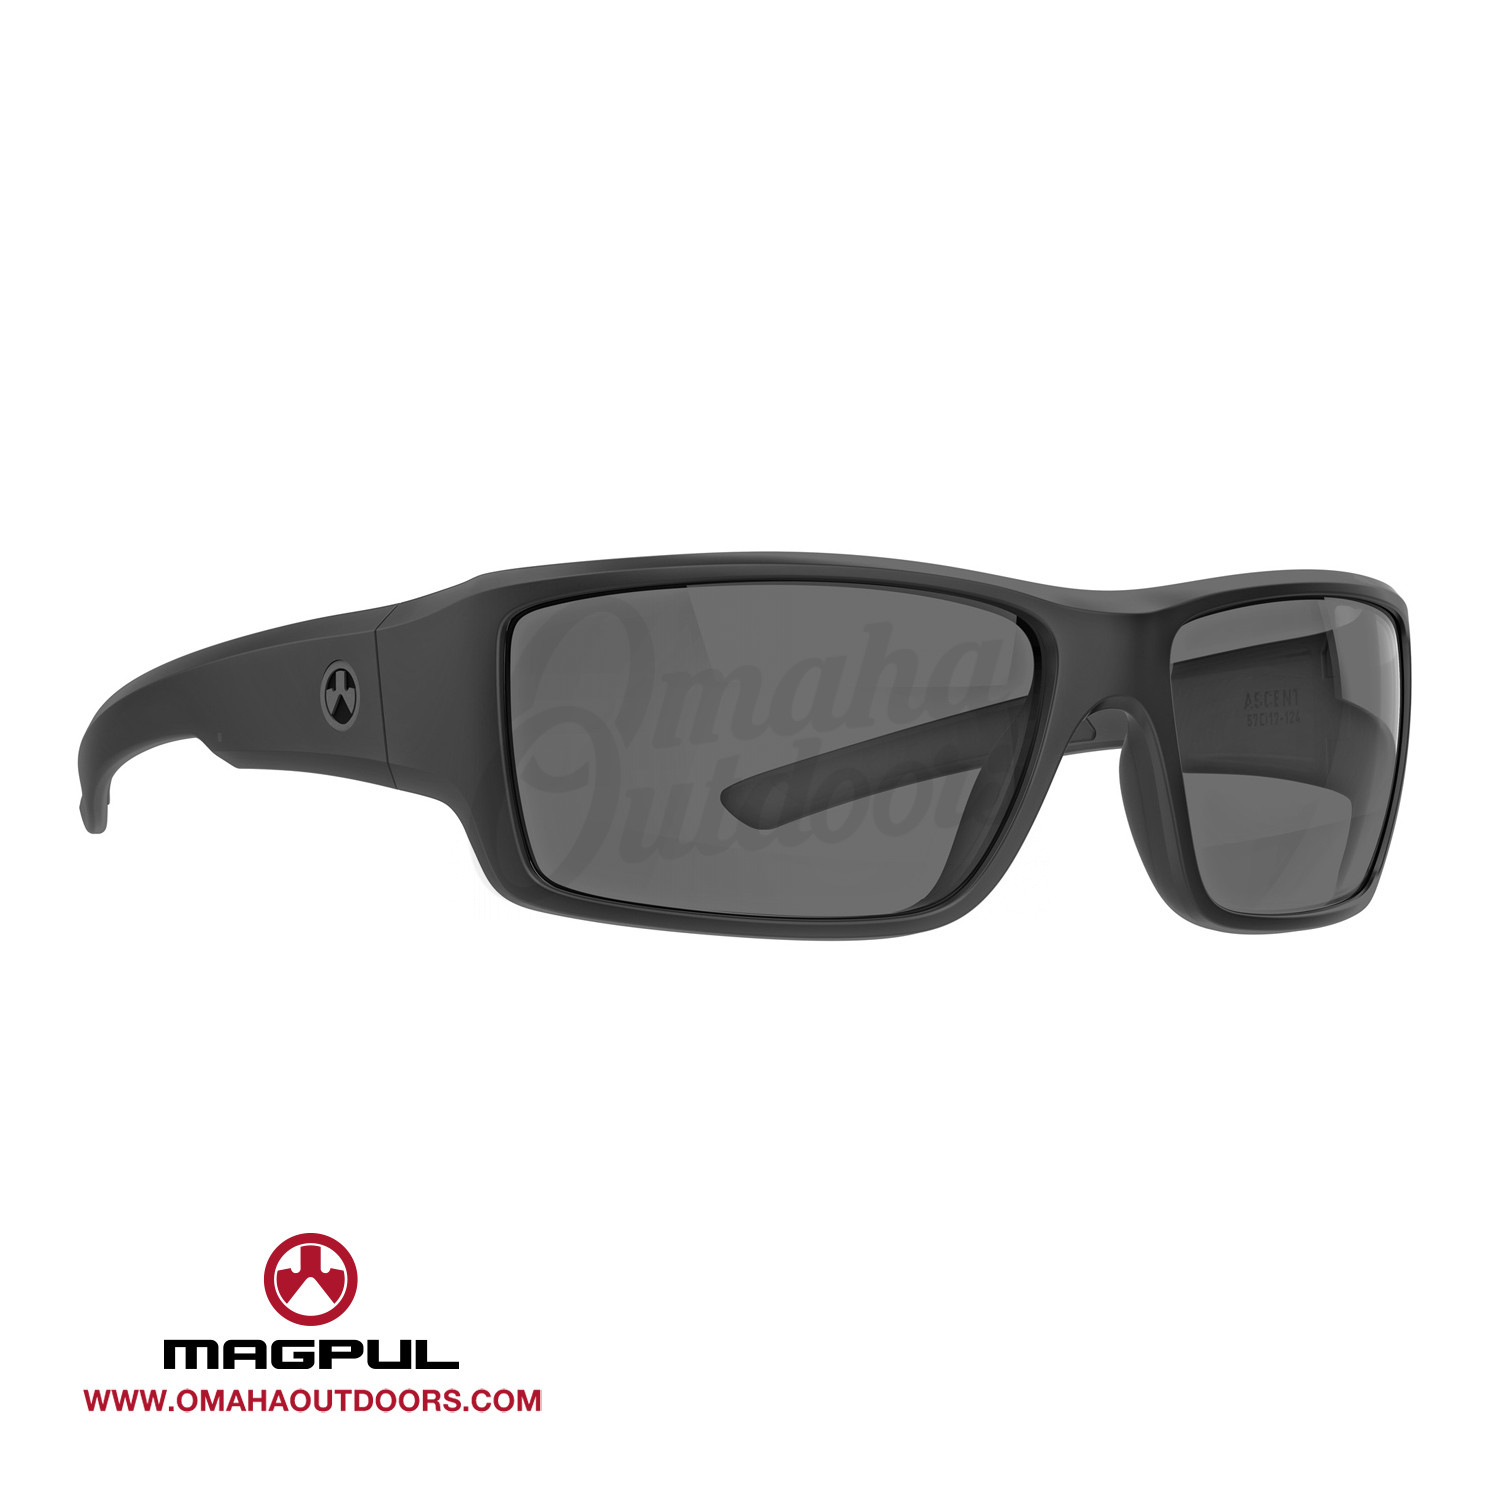 Magpul Ascent Gray Sunglasses Lens Stock Green In 